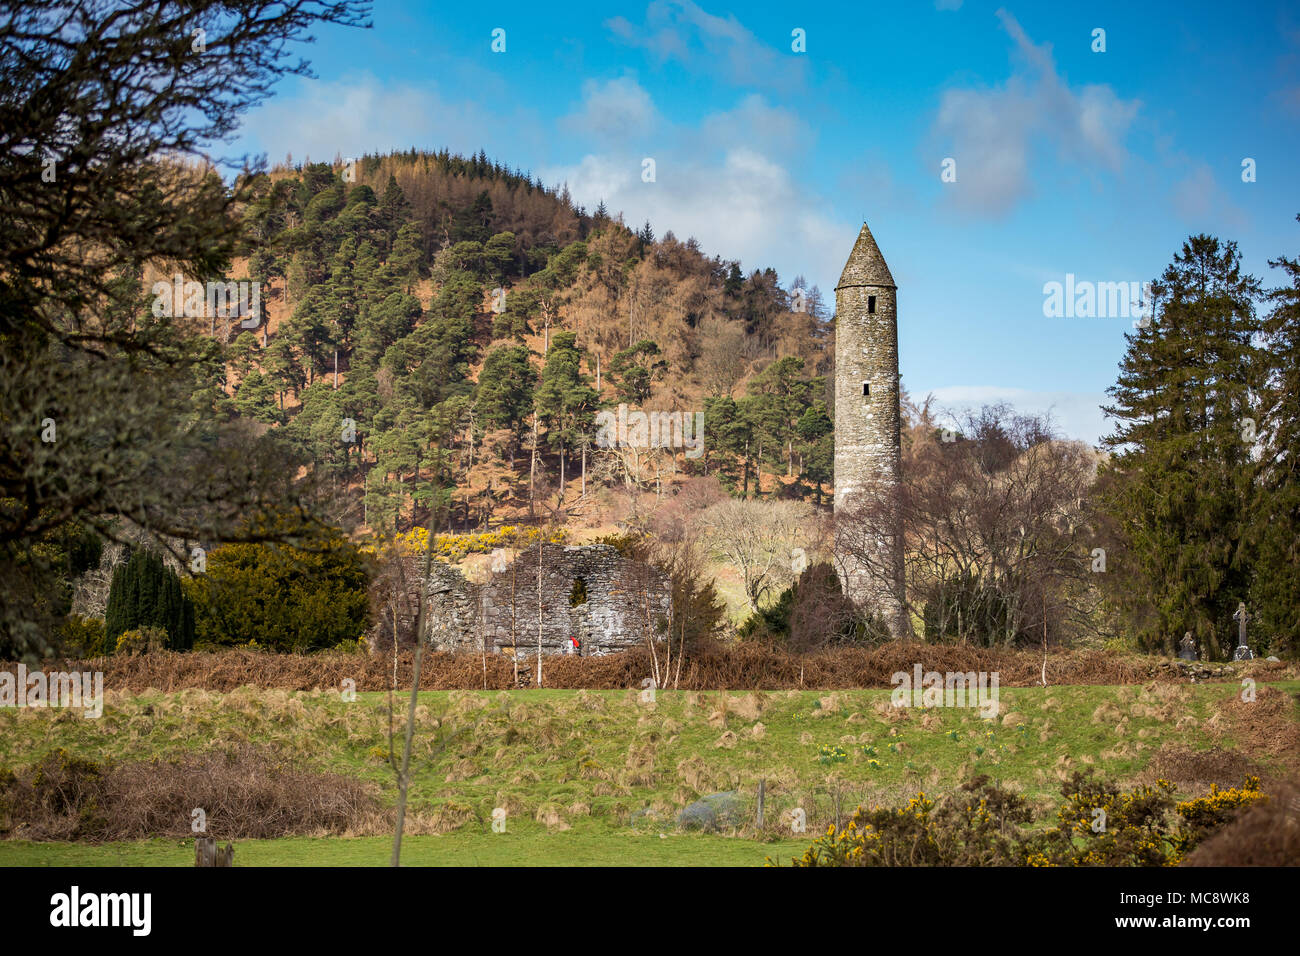 Stone round tower and some ruins of a monastic settlement originally built in the 6th century in Glendalough valley, County Wicklow, Ireland Stock Photo